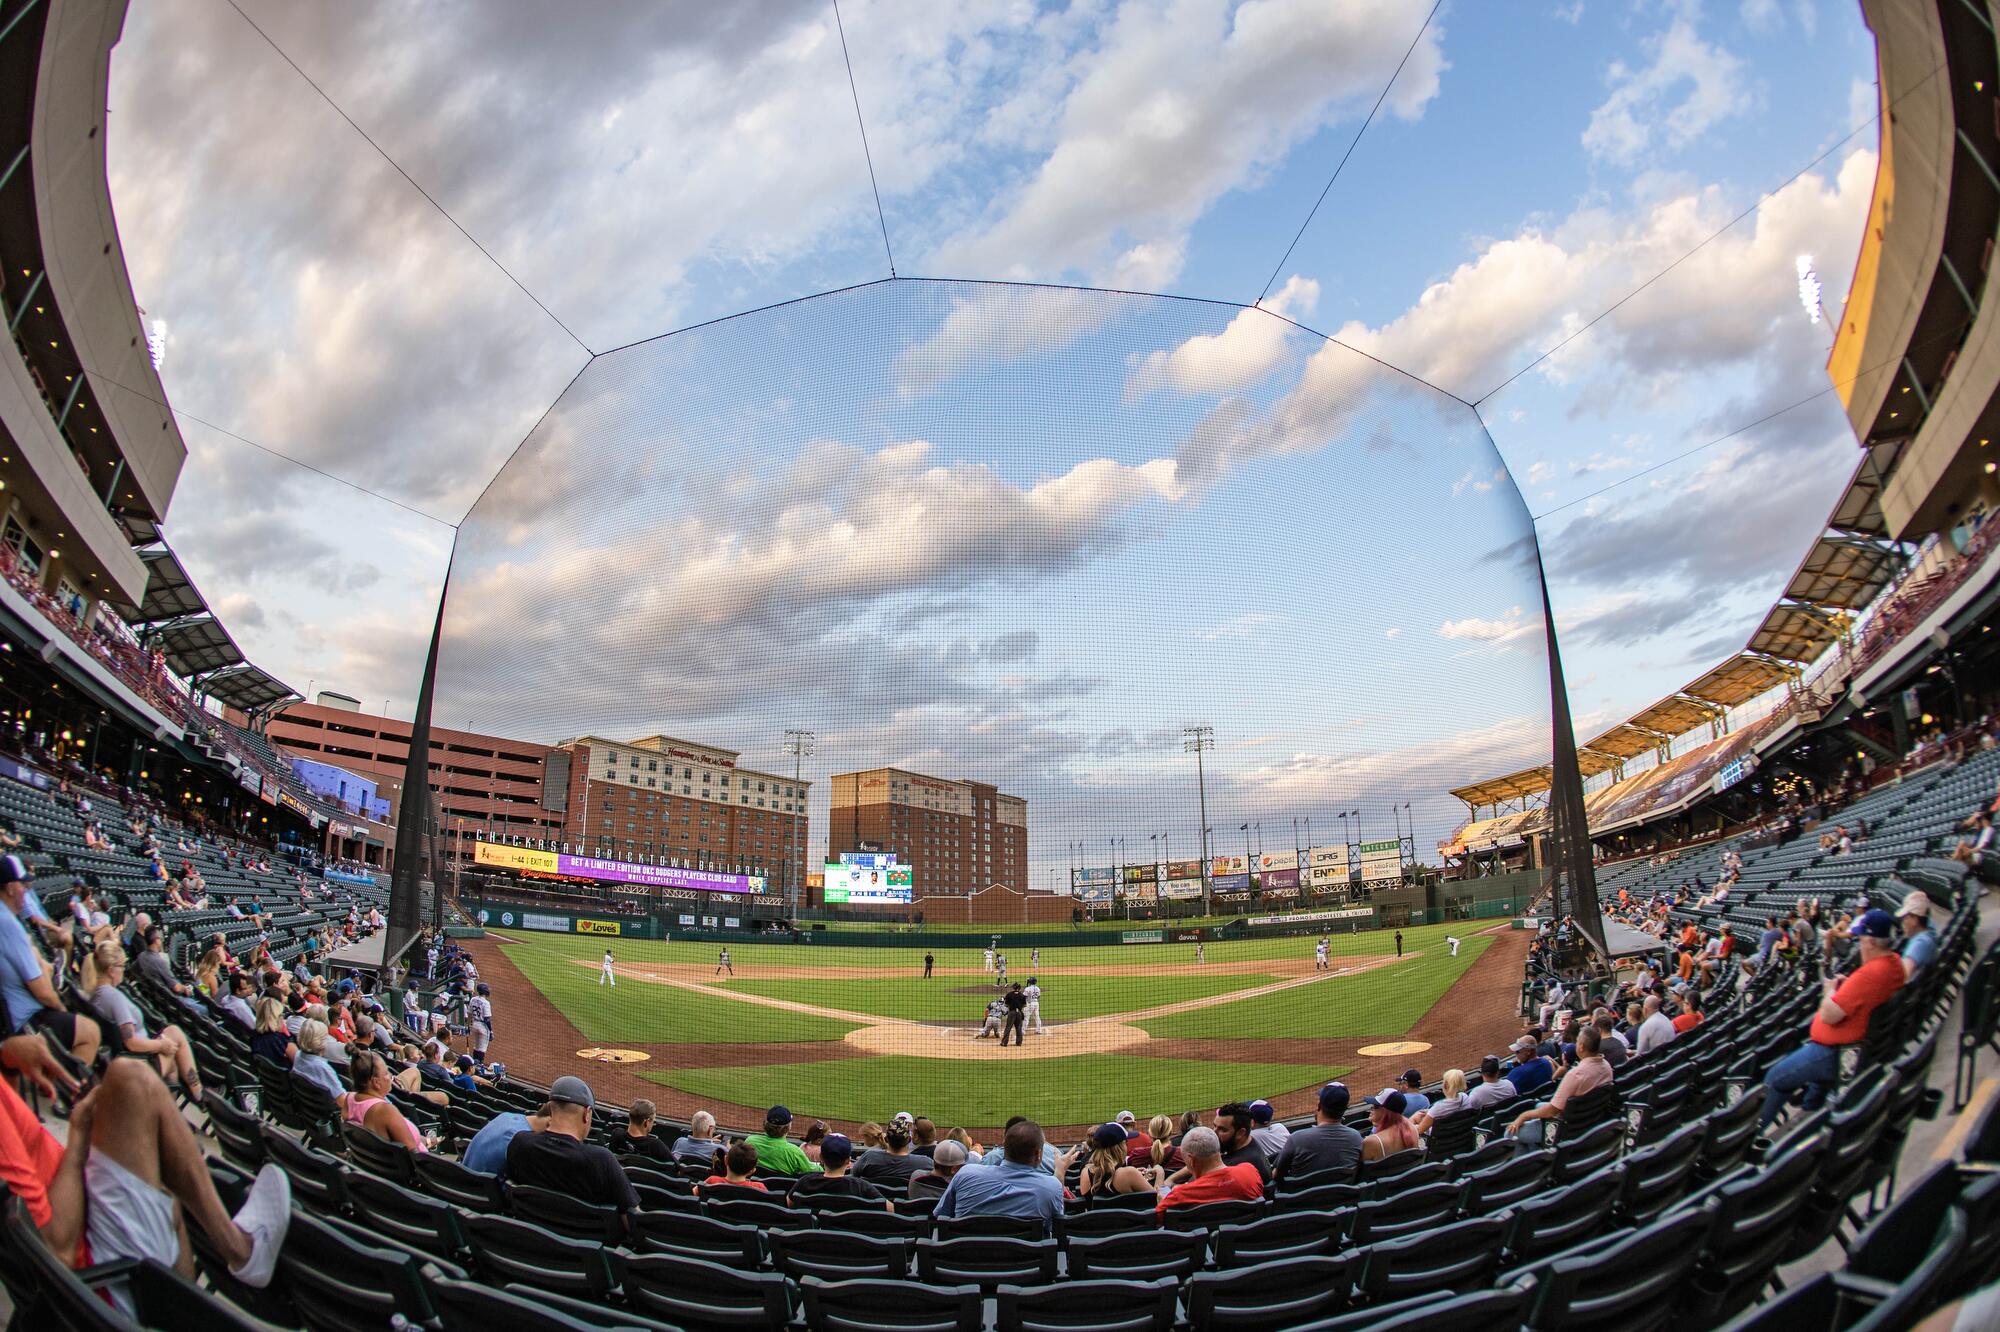 Fans watch the Oklahoma City Dodgers play at Chickasaw Bricktown Ballpark in downtown Oklahoma City.